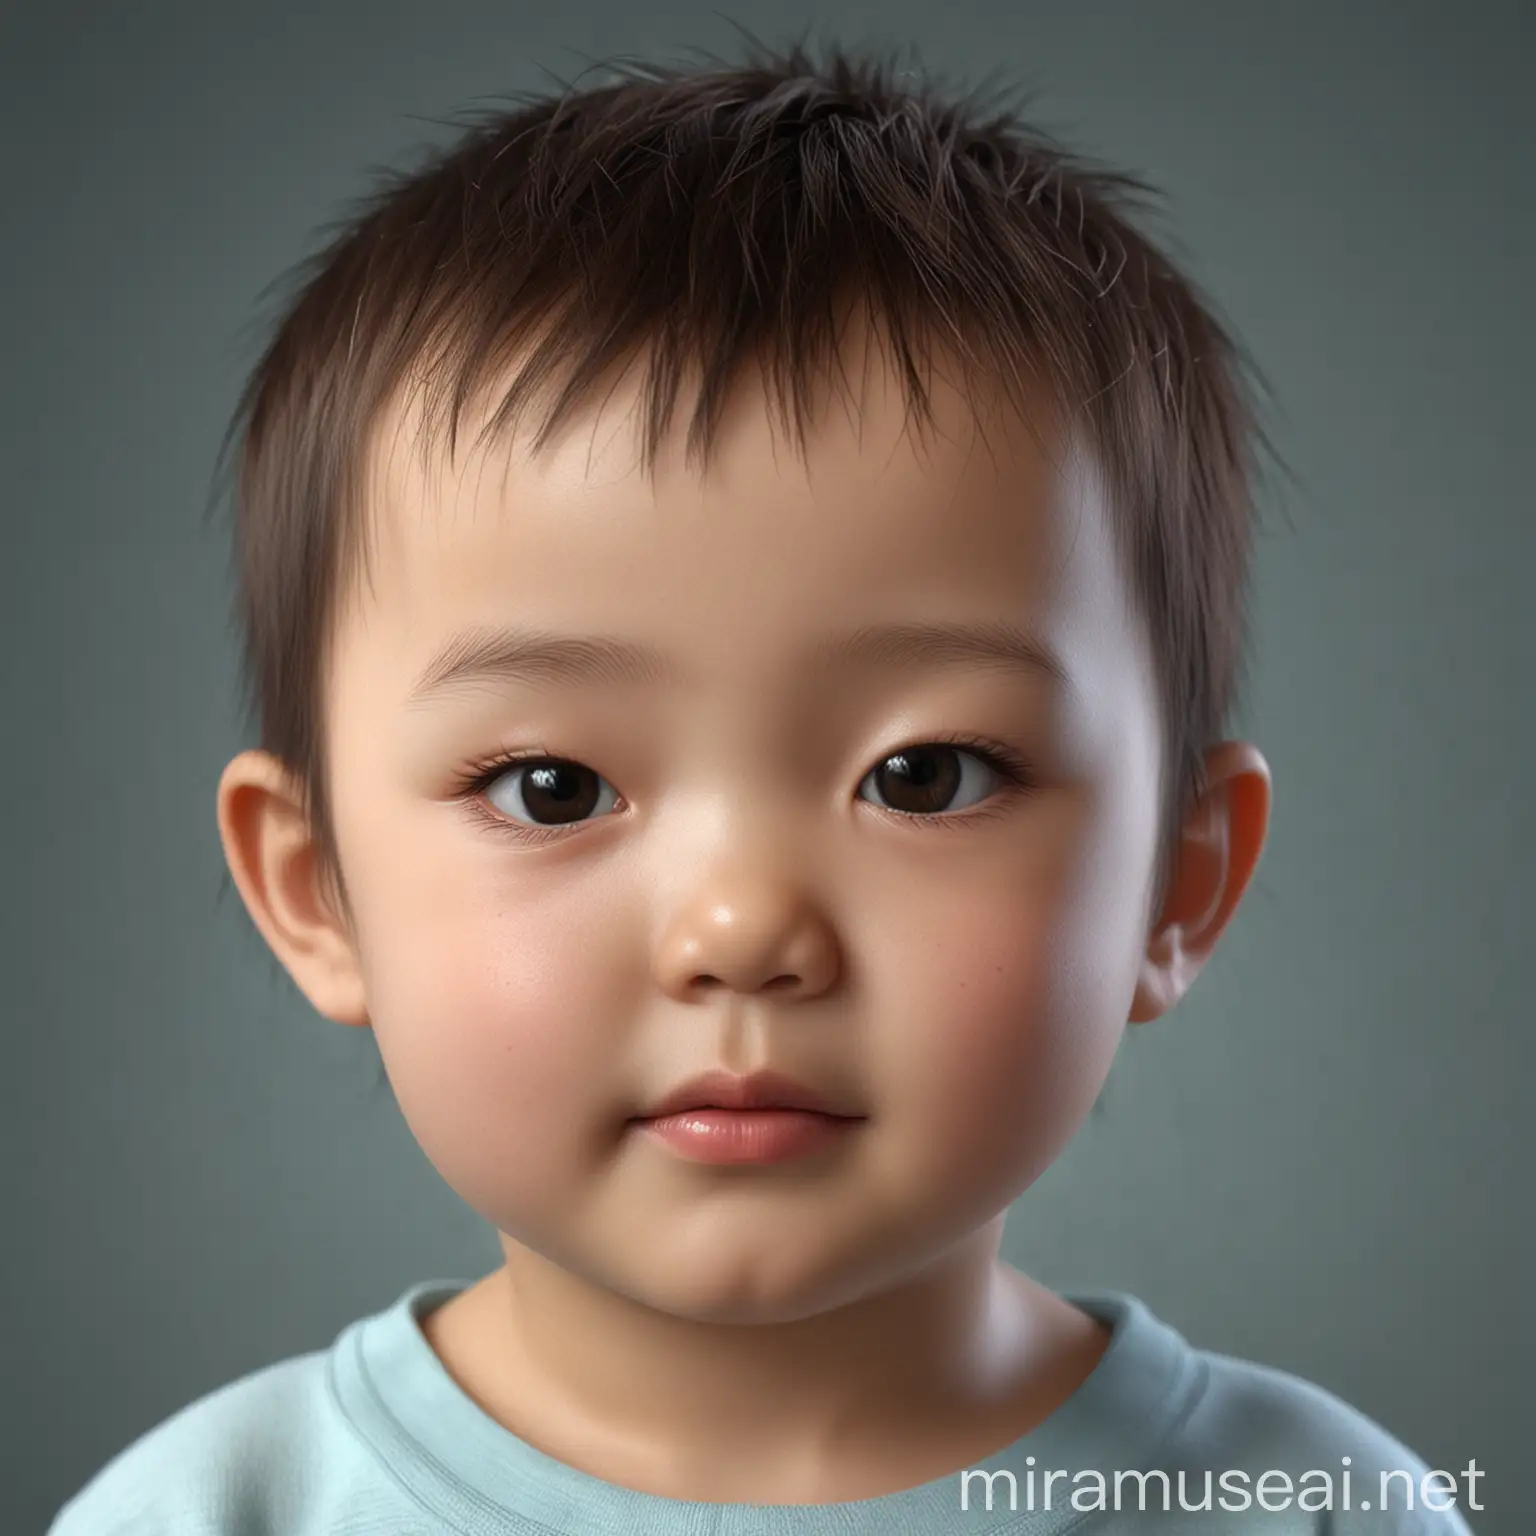 Chinese Child Portrait in 3D Photography